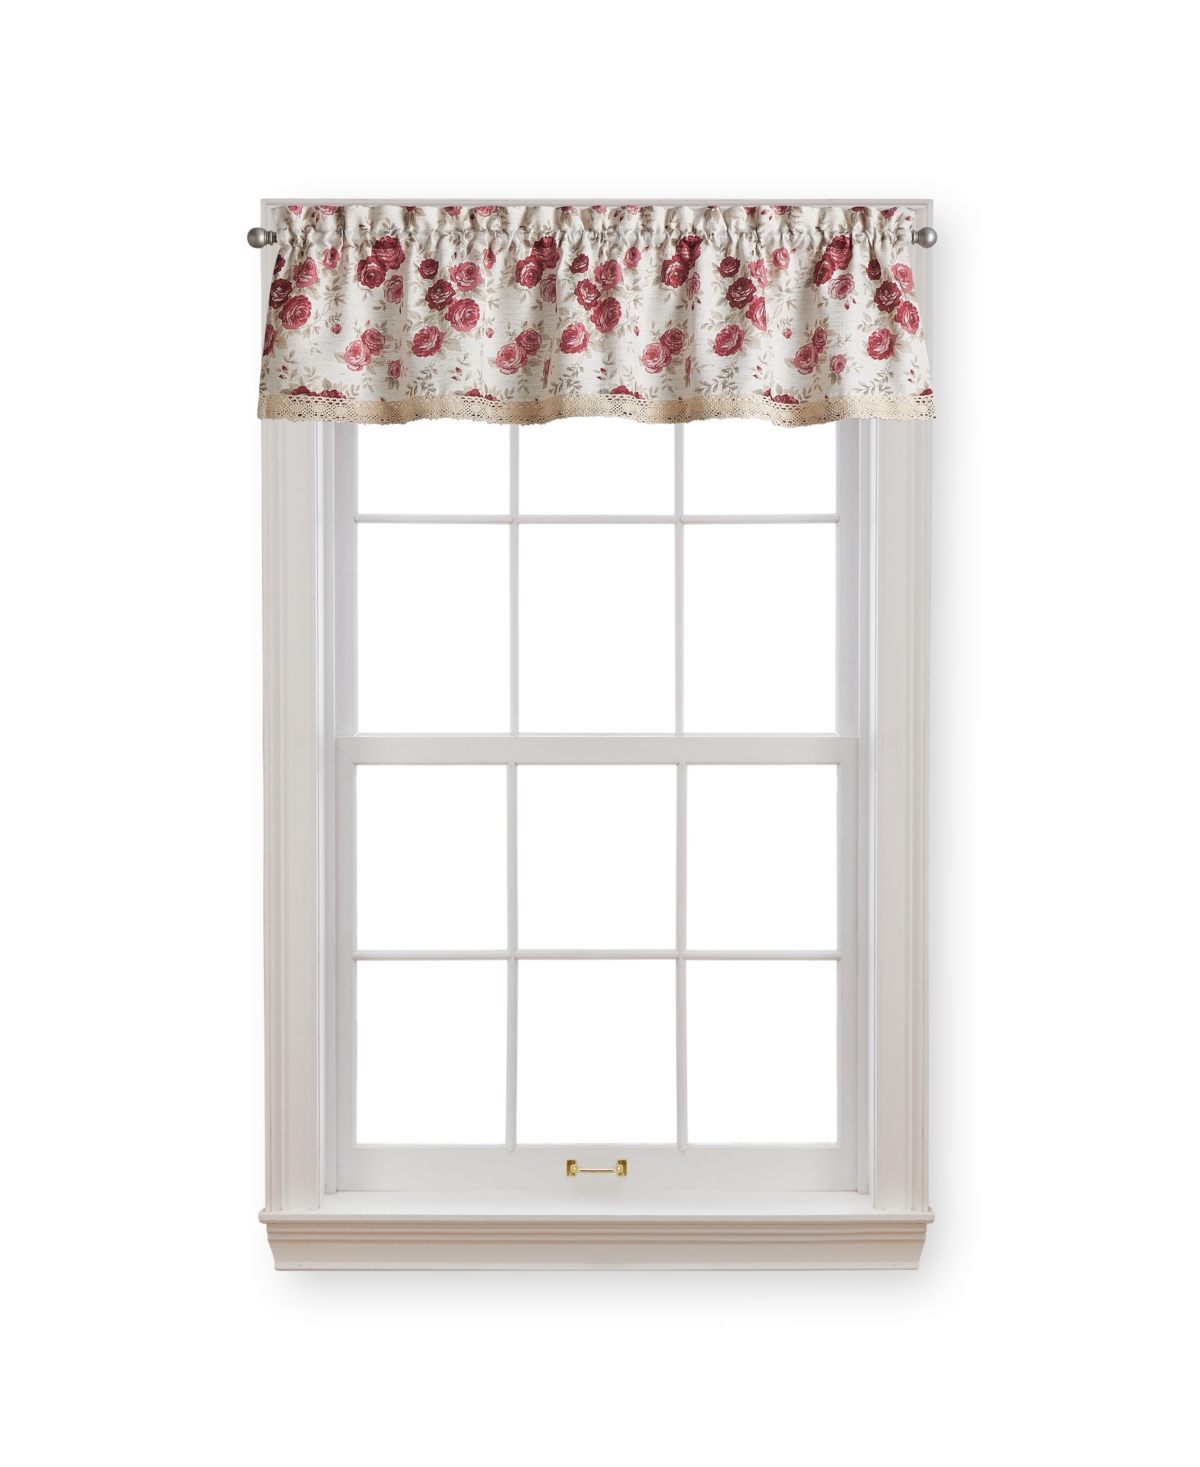 Rose Tailored Valance, 14" x 54" - Red